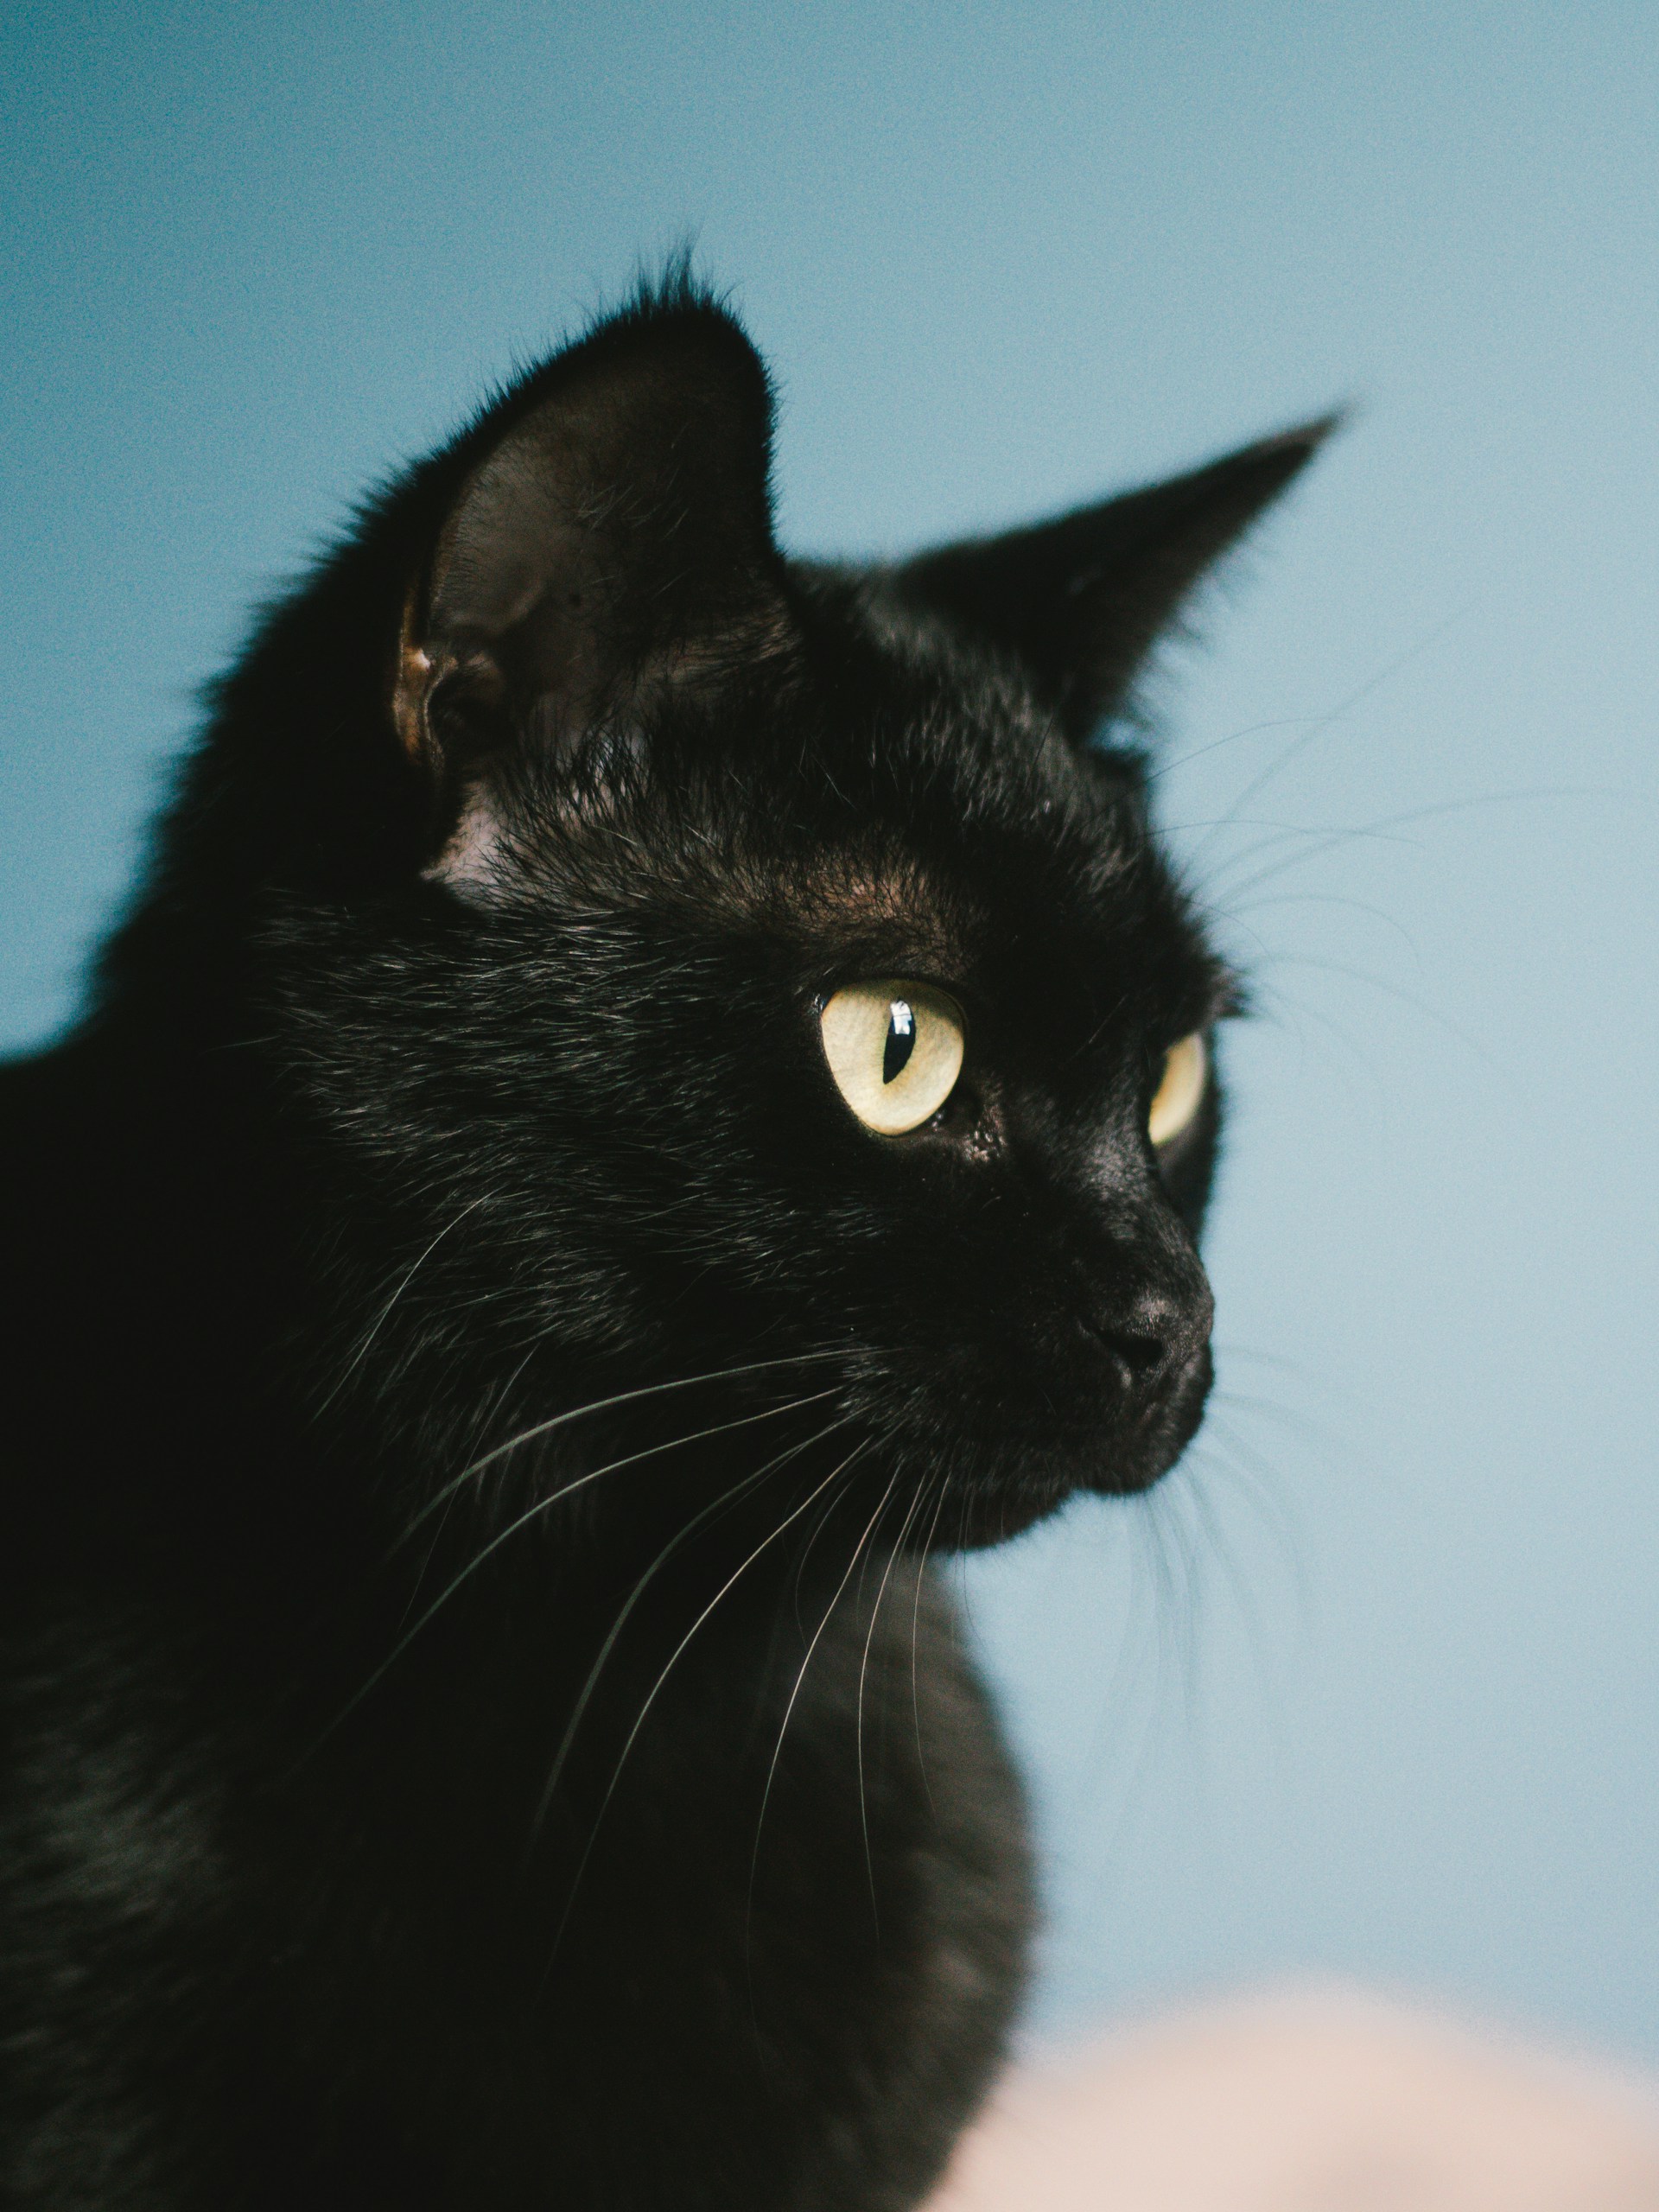 Blackie was the richest cat in the world, having inherited $12.5 million from his owner Ben Rea in 1988